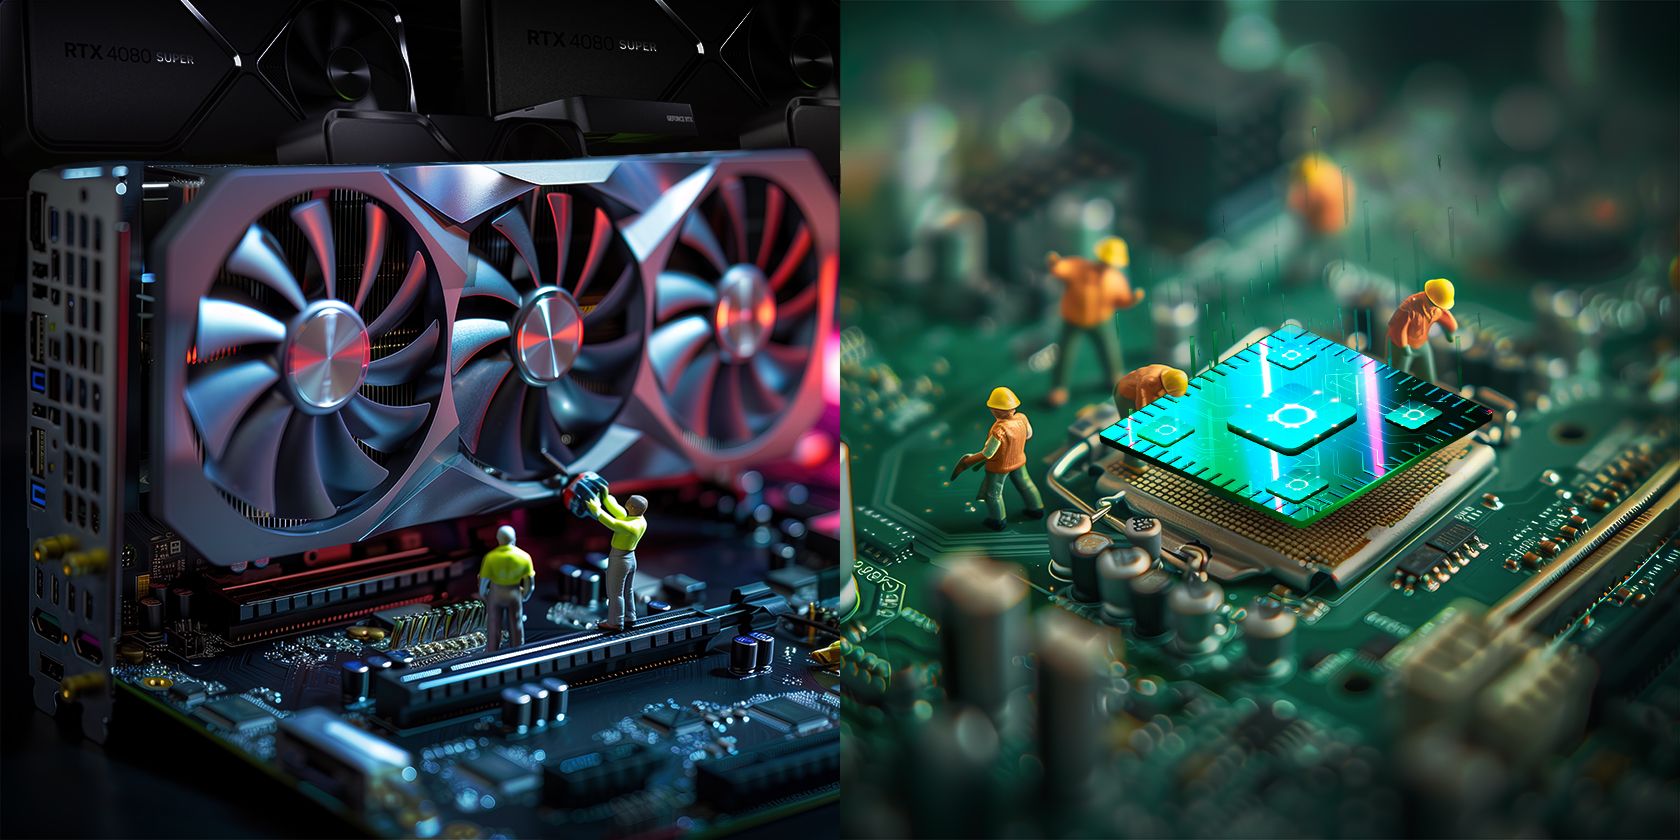 On the left, a high-end graphics card inside a computer setup, and on the right, miniature figures appear to be working on a motherboard with a prominent CPU.